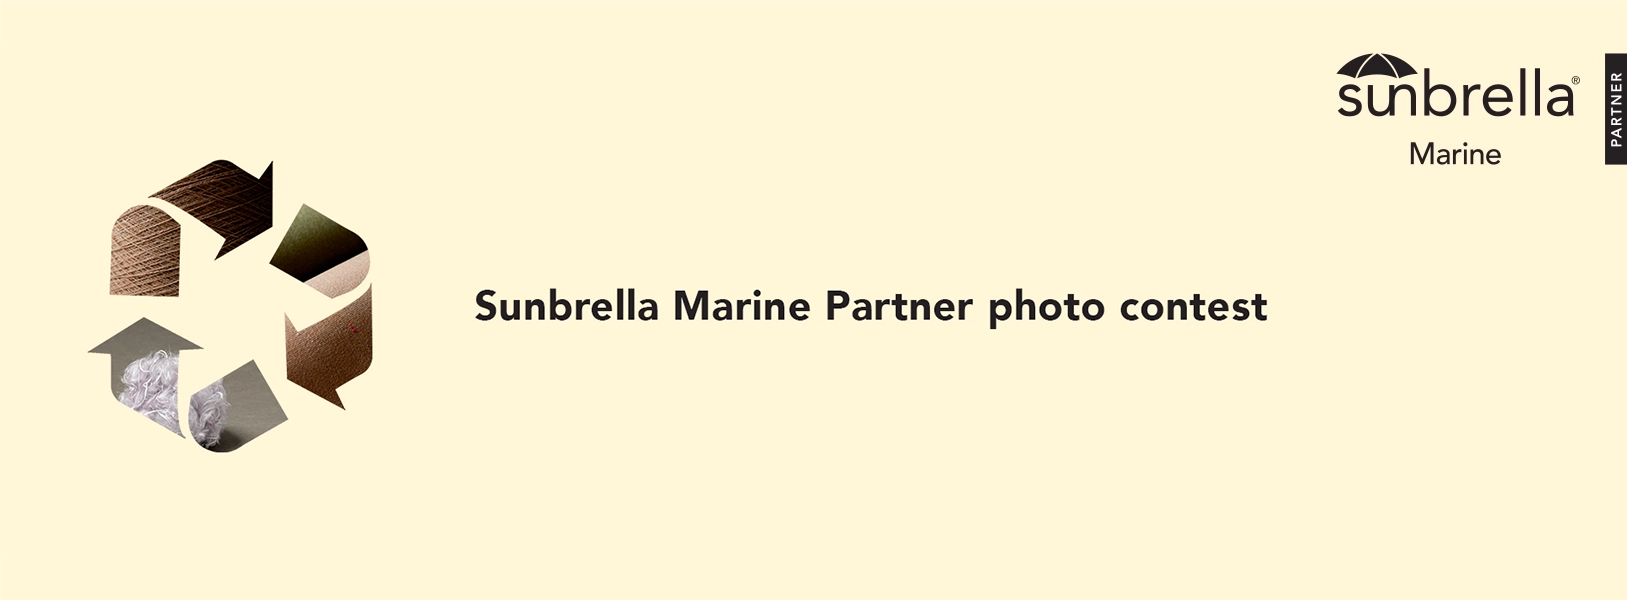 UPCYCLING photo competition for Sunbrella Marine Partners